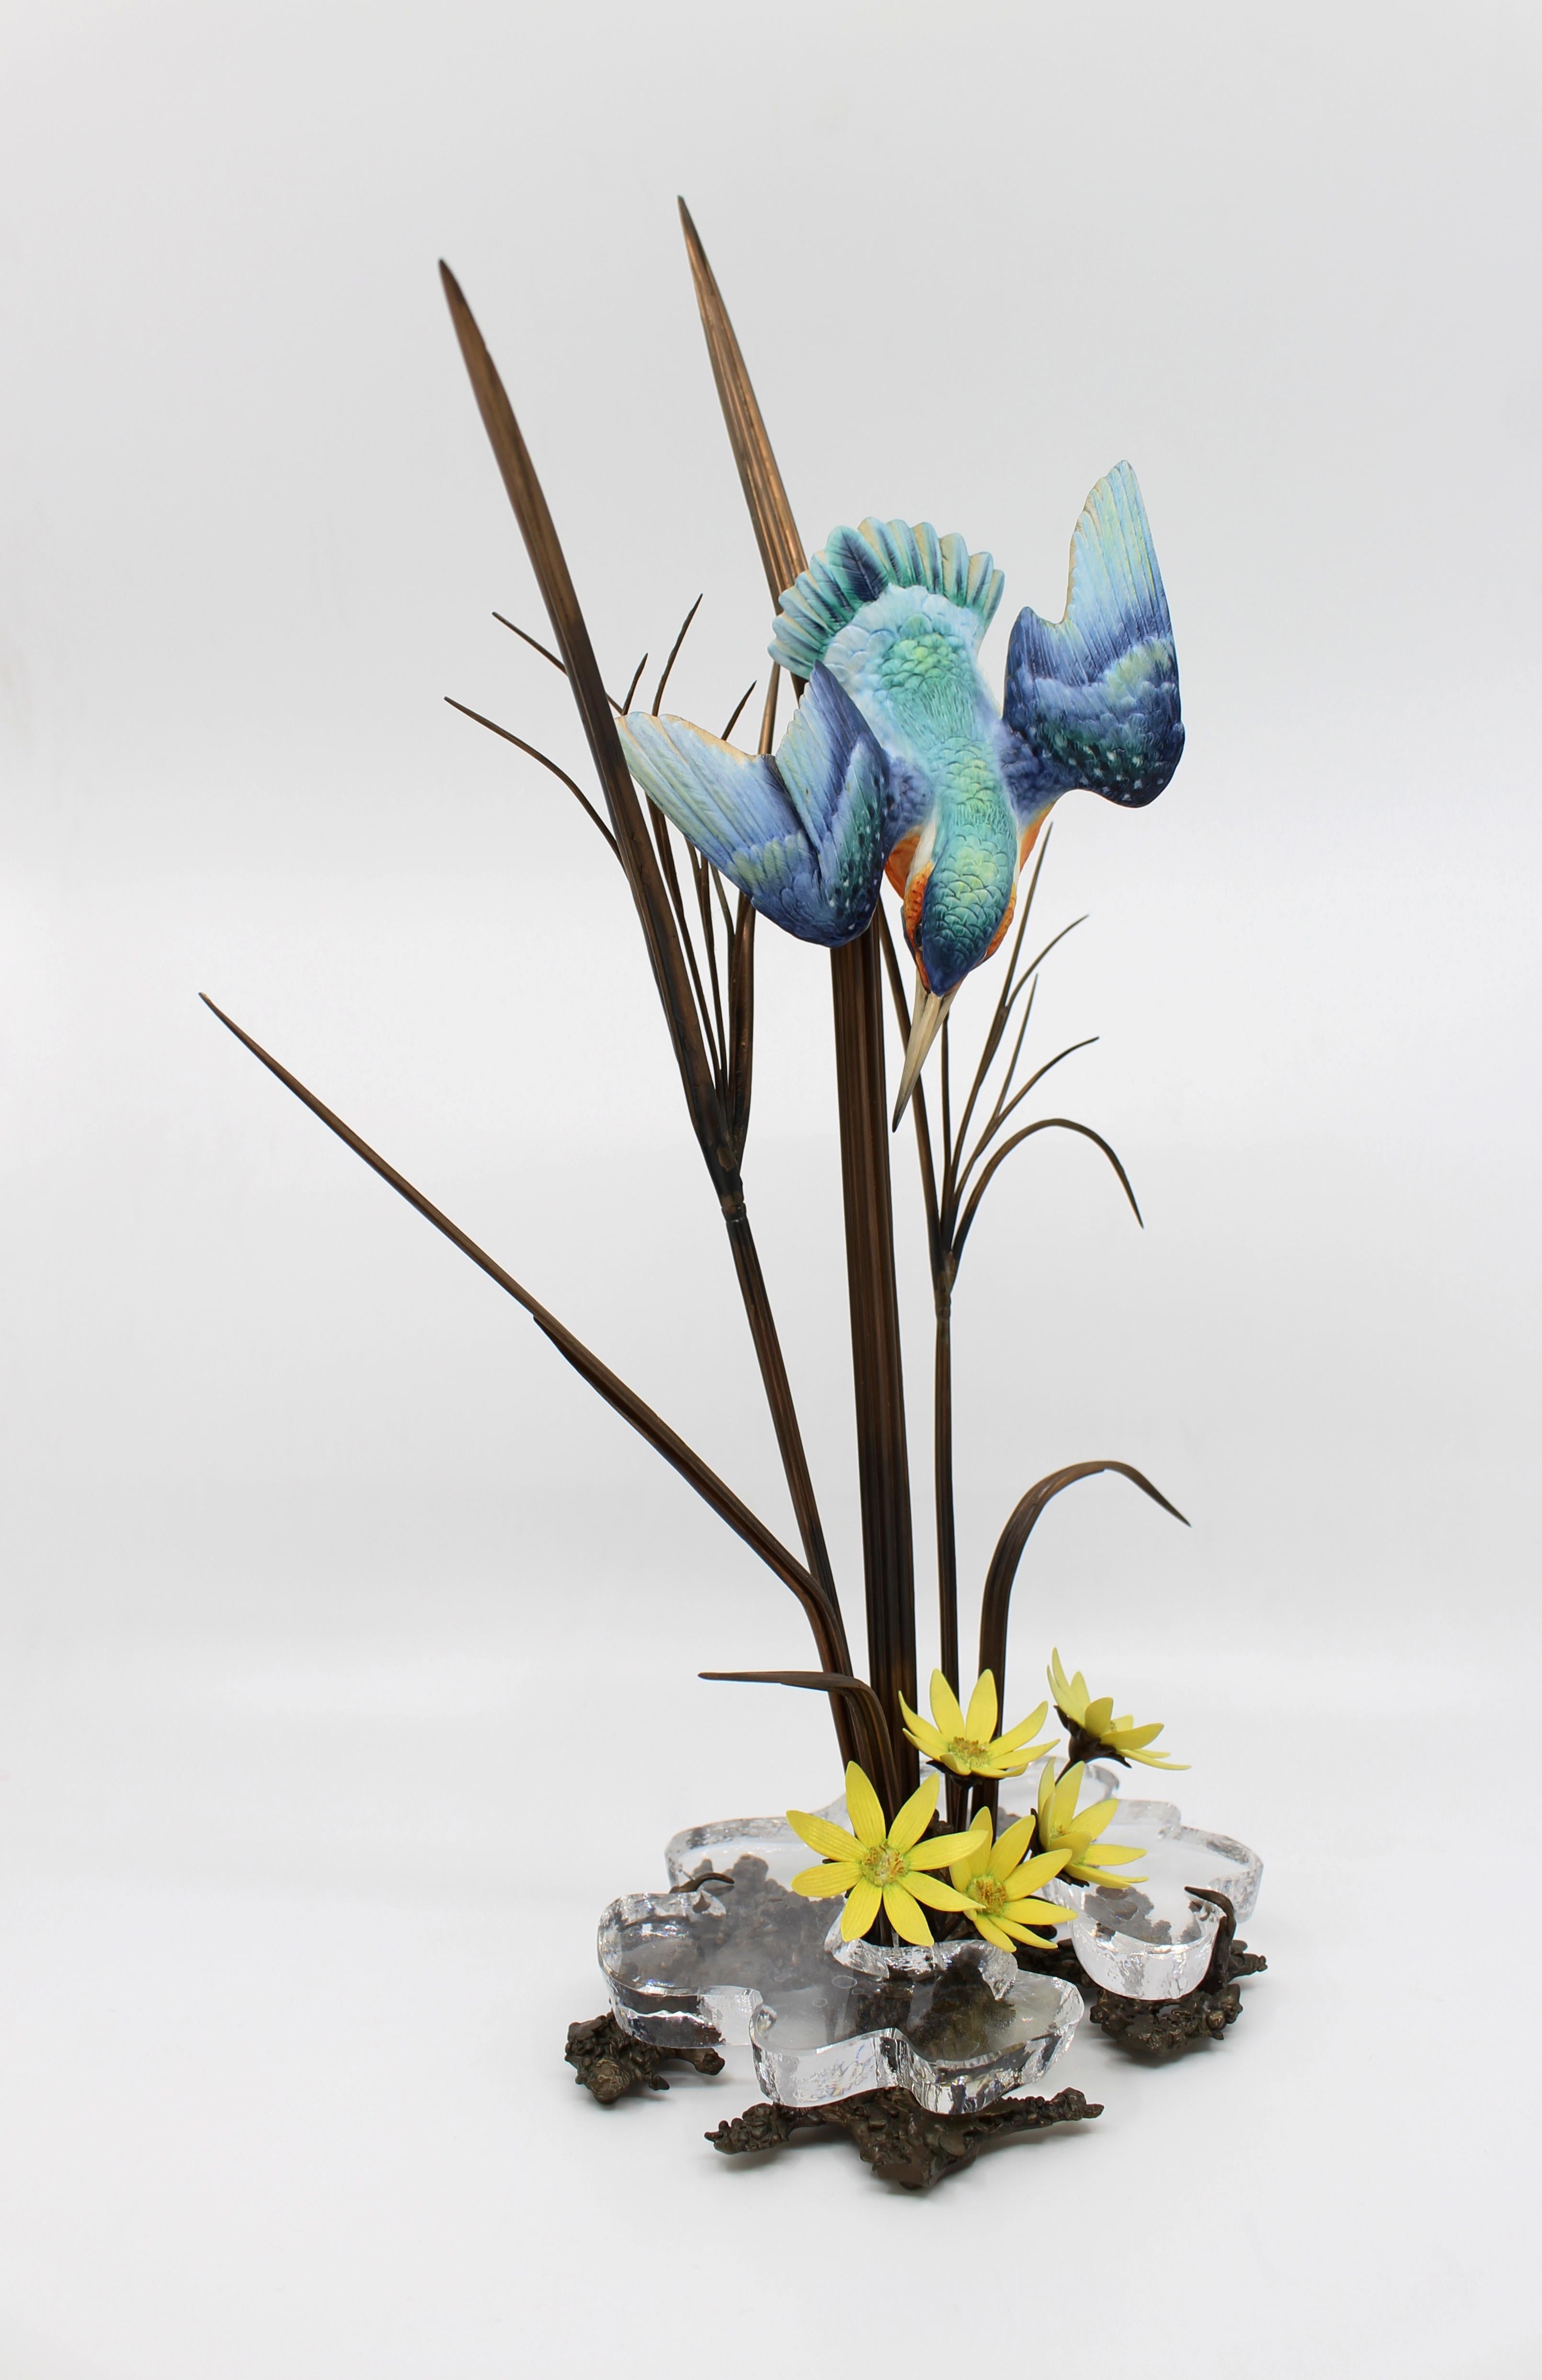 Manufacturer Albany Fine China Ltd England, Worcester
Bird Kingfisher 
Composition porcelain bird and flowers on bronze with rock crystal to the base
Measures: Height 40.5 cm / 16 in
Modeller David Burnham-Smith
Factory mark stamped Albany to